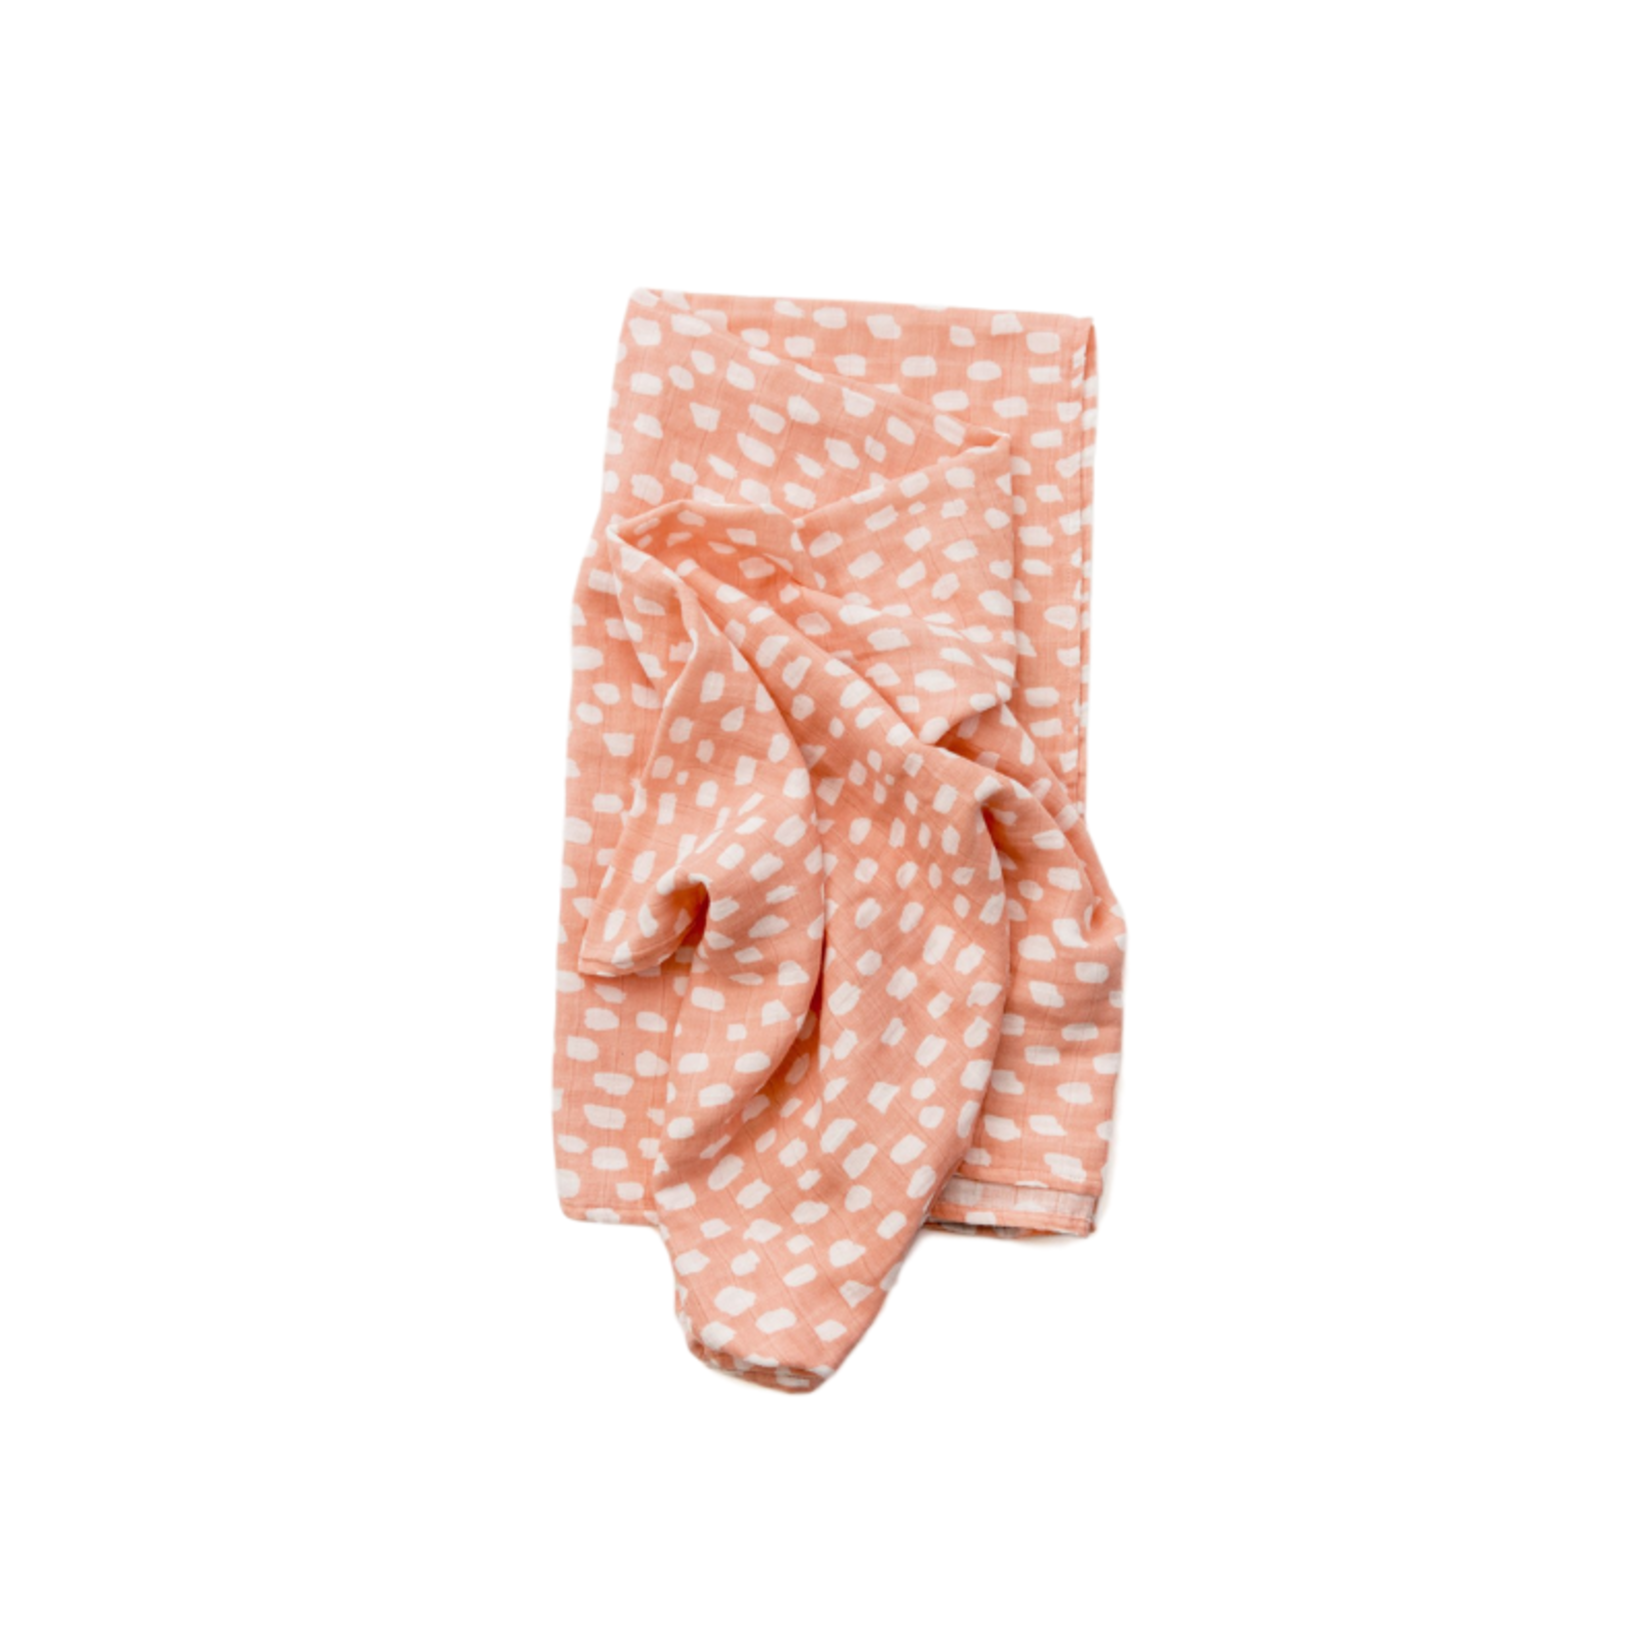 clementine spotted blush swaddle